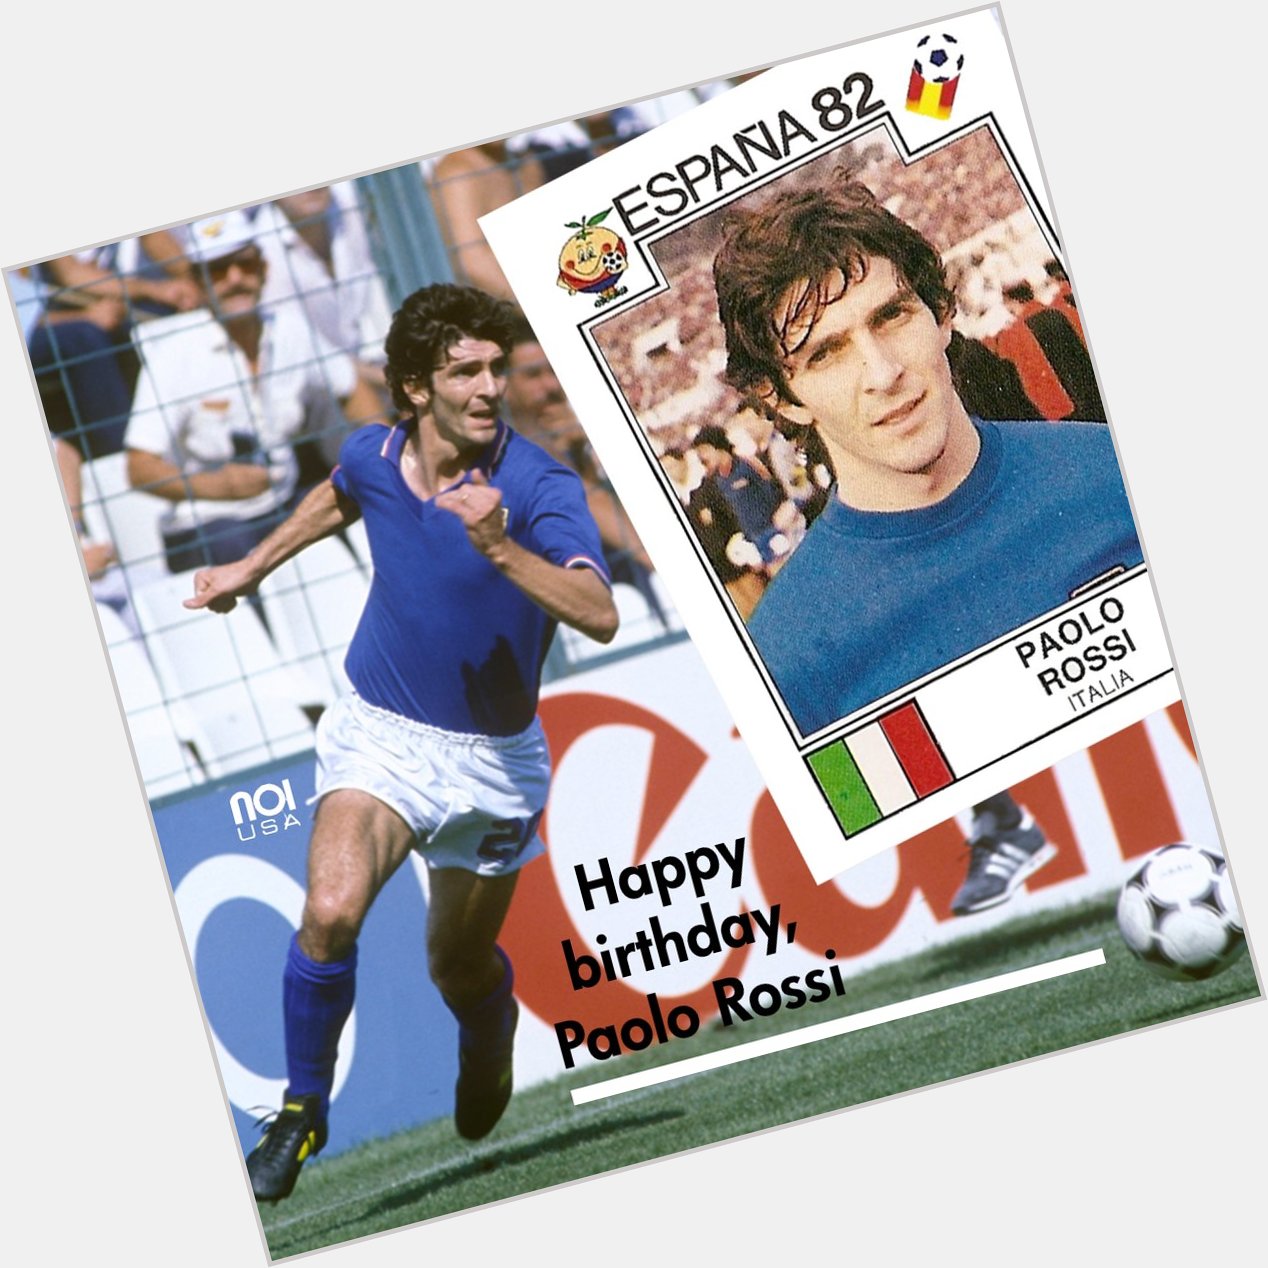 Happy birthday to Paolo Rossi!!! Do you remember his 1982 World Cup?? 